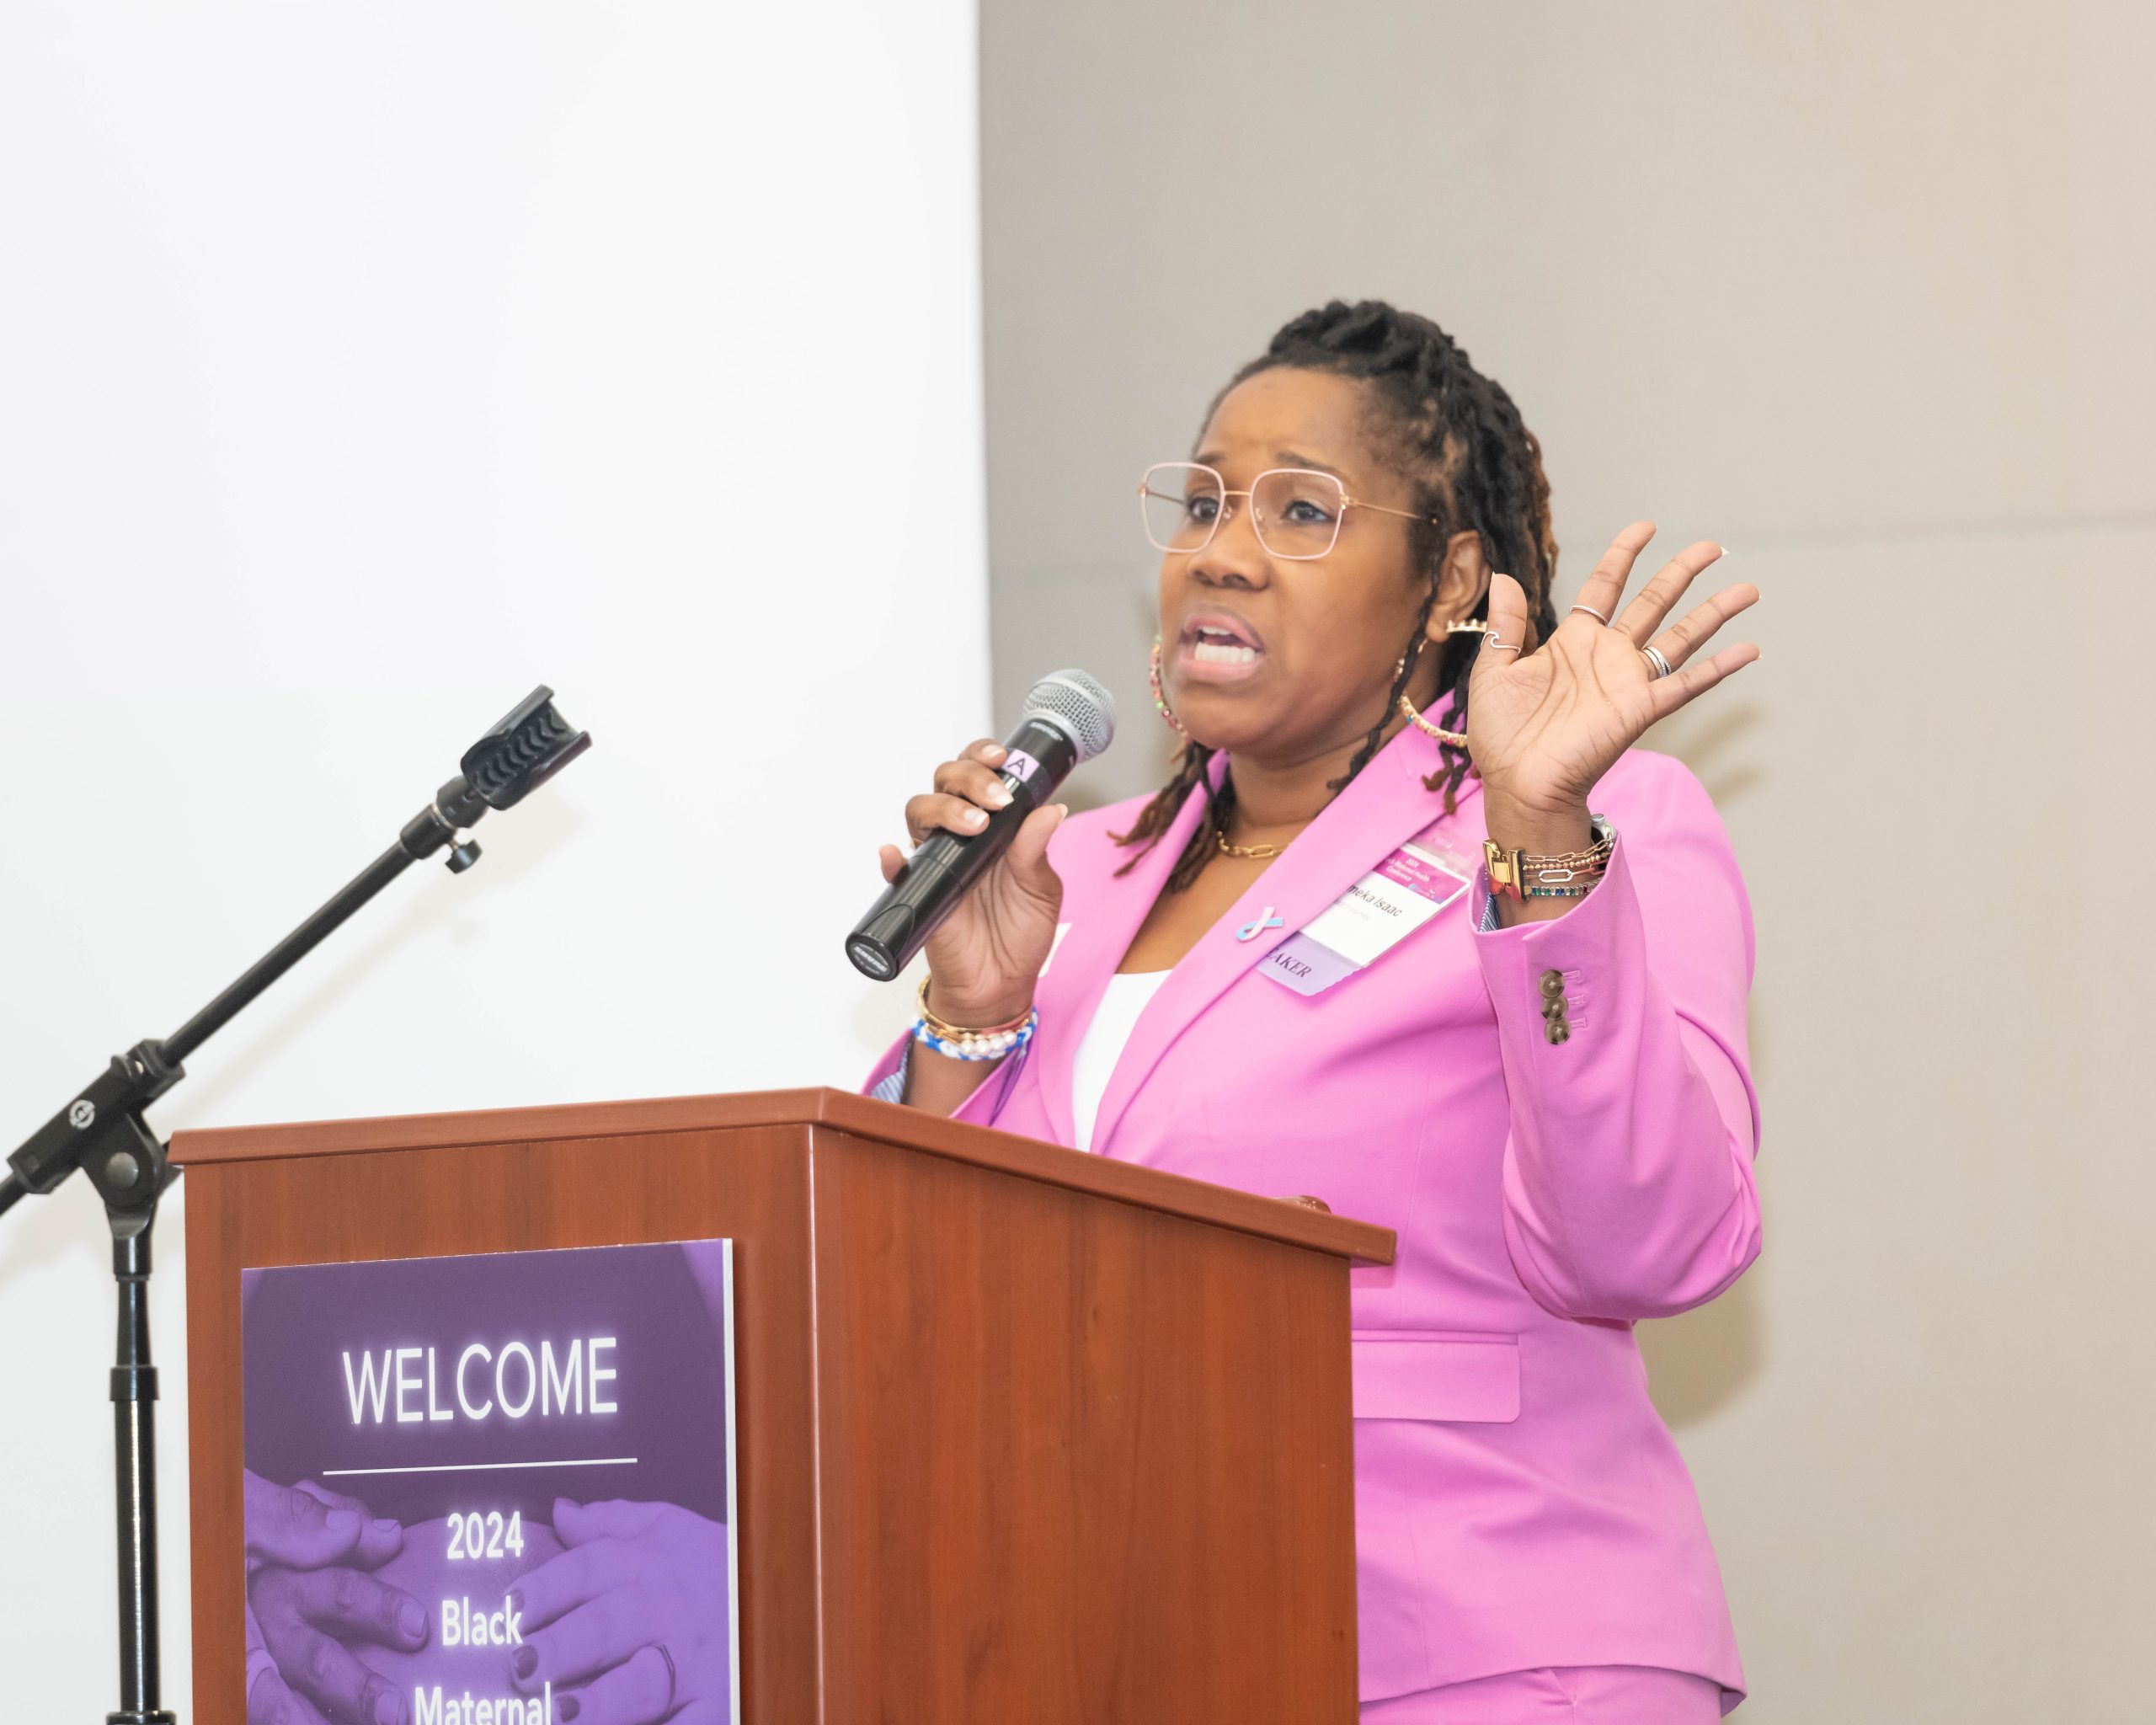 A Black woman wearing a bright pink suit shares her personal experience with pregnancy complications and the loss of her son at a conference on Black maternal health